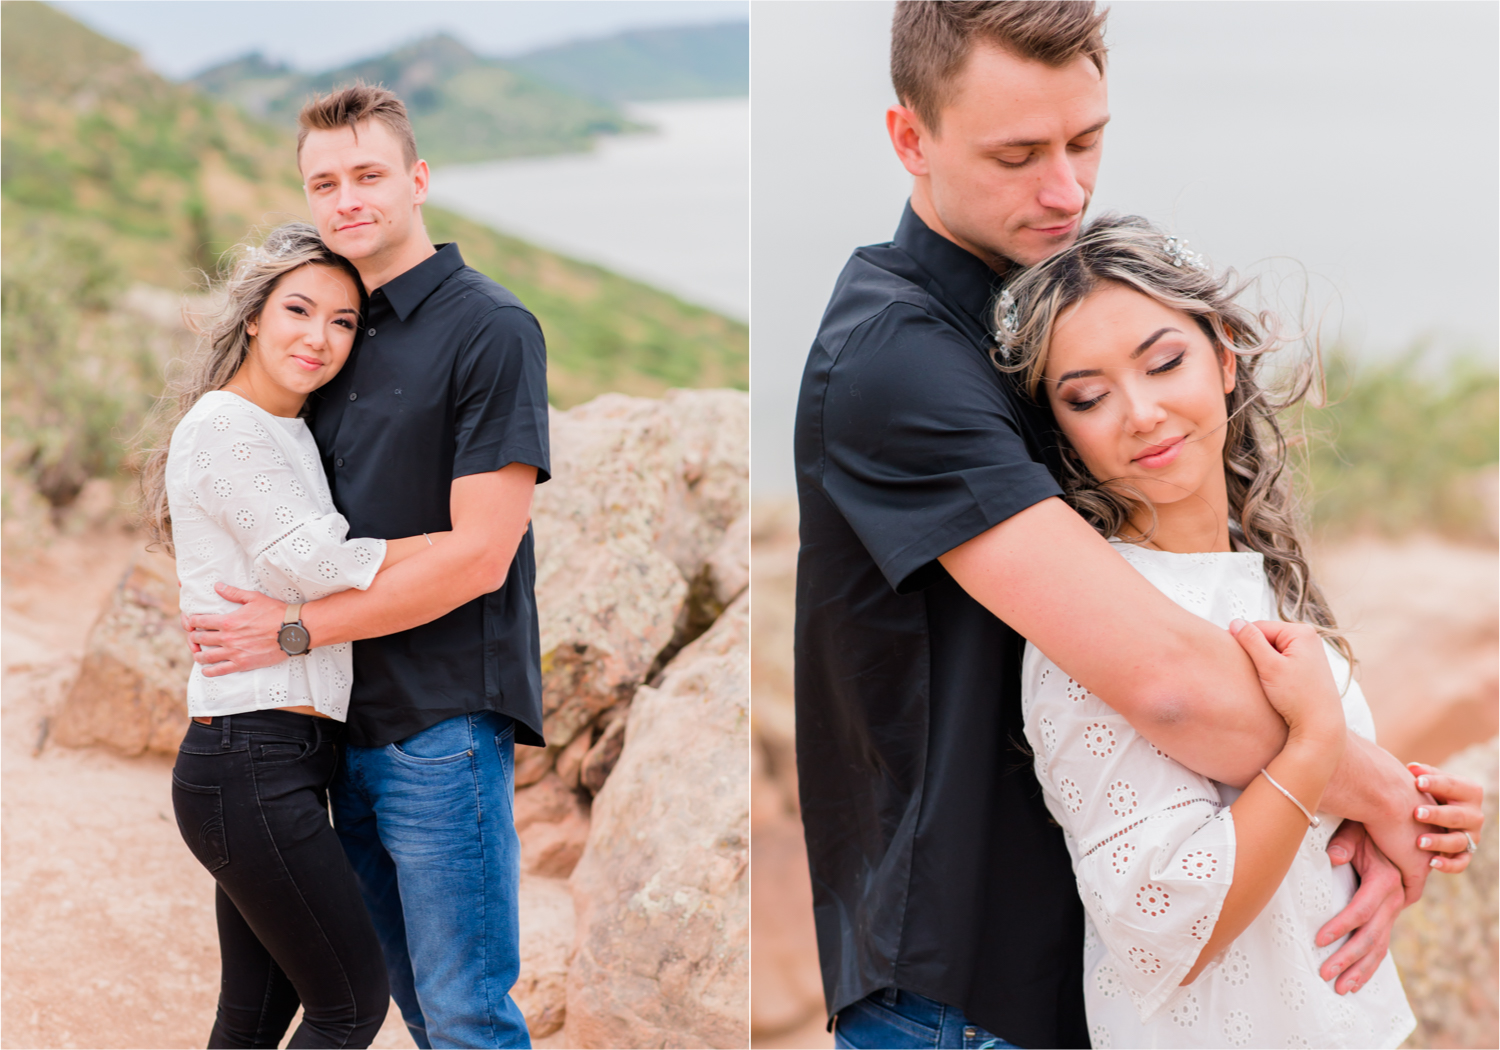 Romantic and Playful Summer engagement session at Horsetooth Reservoir in Fort Collins Colorado | Britni Girard Photographer | Wedding photographer and videographer team